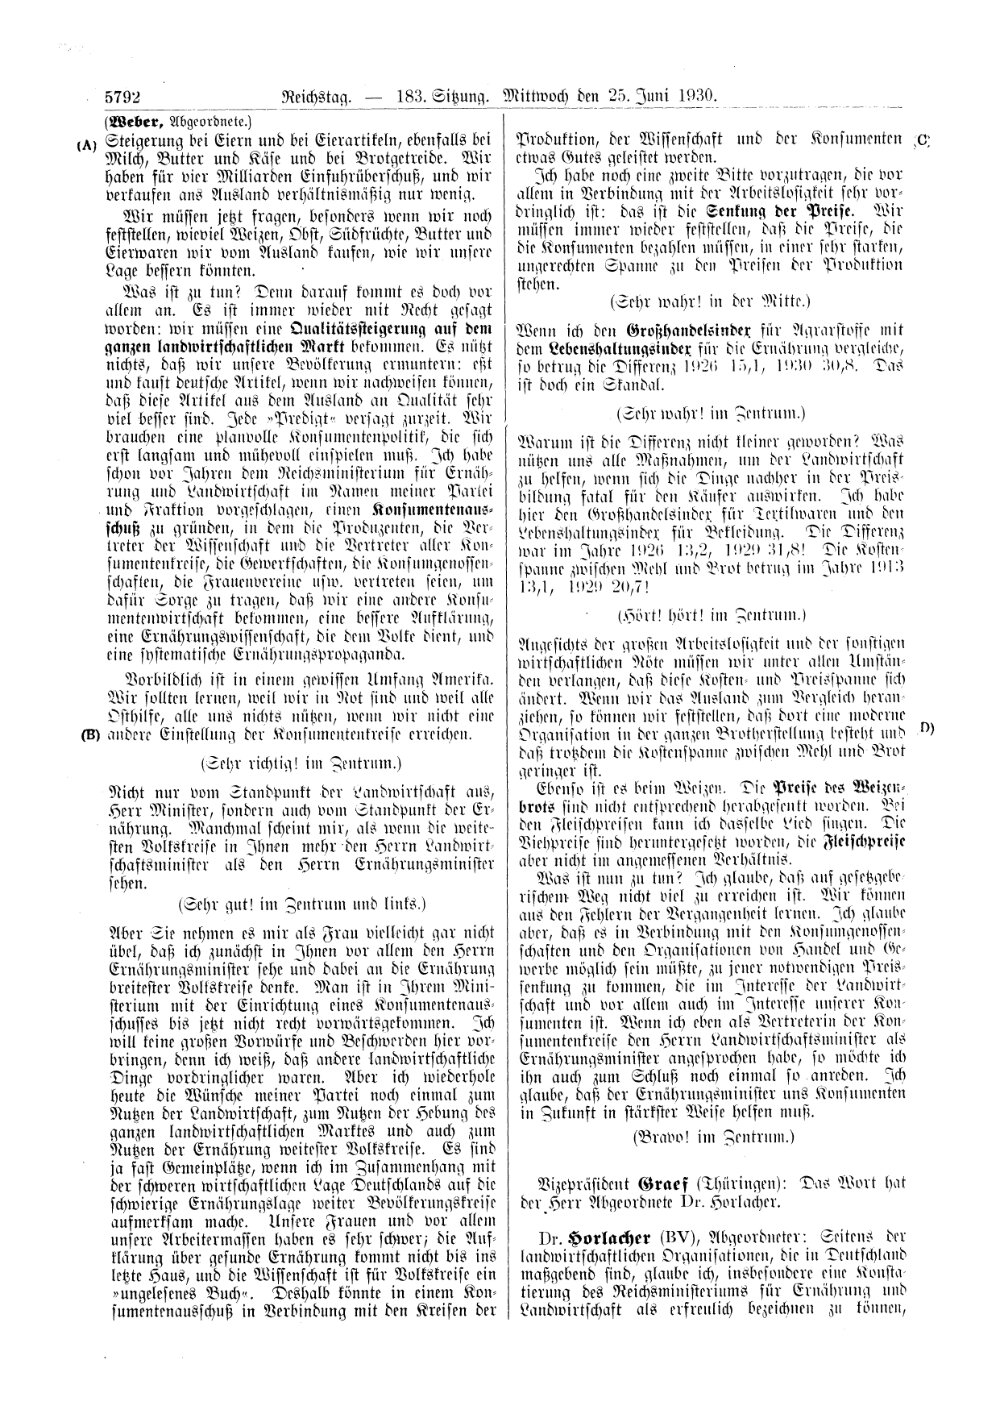 Scan of page 5792